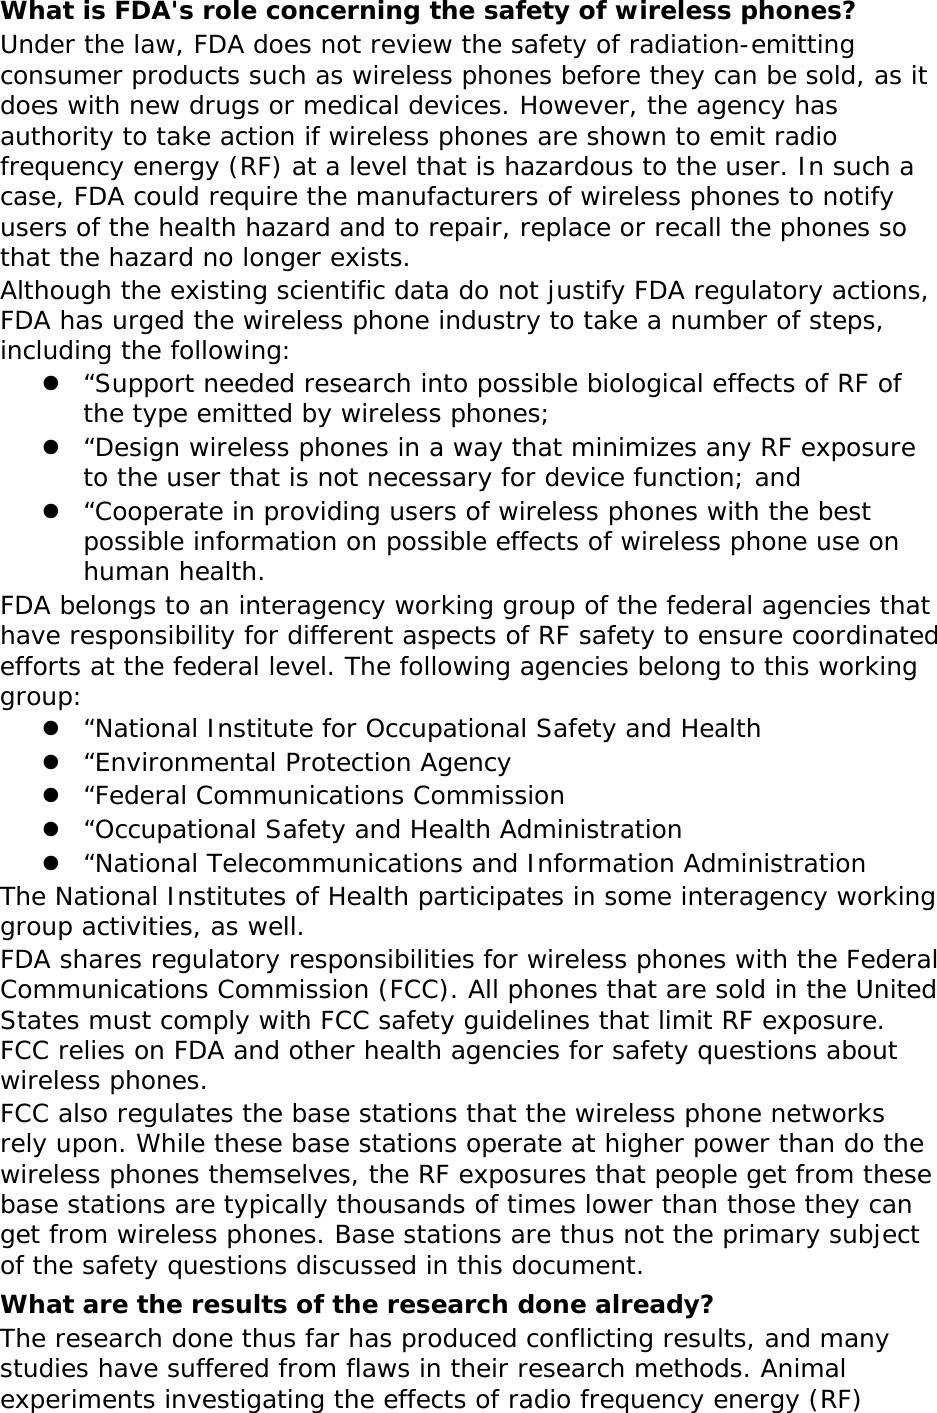 What is FDA&apos;s role concerning the safety of wireless phones? Under the law, FDA does not review the safety of radiation-emitting consumer products such as wireless phones before they can be sold, as it does with new drugs or medical devices. However, the agency has authority to take action if wireless phones are shown to emit radio frequency energy (RF) at a level that is hazardous to the user. In such a case, FDA could require the manufacturers of wireless phones to notify users of the health hazard and to repair, replace or recall the phones so that the hazard no longer exists. Although the existing scientific data do not justify FDA regulatory actions, FDA has urged the wireless phone industry to take a number of steps, including the following:  “Support needed research into possible biological effects of RF of the type emitted by wireless phones;  “Design wireless phones in a way that minimizes any RF exposure to the user that is not necessary for device function; and  “Cooperate in providing users of wireless phones with the best possible information on possible effects of wireless phone use on human health. FDA belongs to an interagency working group of the federal agencies that have responsibility for different aspects of RF safety to ensure coordinated efforts at the federal level. The following agencies belong to this working group:  “National Institute for Occupational Safety and Health  “Environmental Protection Agency  “Federal Communications Commission  “Occupational Safety and Health Administration  “National Telecommunications and Information Administration The National Institutes of Health participates in some interagency working group activities, as well. FDA shares regulatory responsibilities for wireless phones with the Federal Communications Commission (FCC). All phones that are sold in the United States must comply with FCC safety guidelines that limit RF exposure. FCC relies on FDA and other health agencies for safety questions about wireless phones. FCC also regulates the base stations that the wireless phone networks rely upon. While these base stations operate at higher power than do the wireless phones themselves, the RF exposures that people get from these base stations are typically thousands of times lower than those they can get from wireless phones. Base stations are thus not the primary subject of the safety questions discussed in this document. What are the results of the research done already? The research done thus far has produced conflicting results, and many studies have suffered from flaws in their research methods. Animal experiments investigating the effects of radio frequency energy (RF) 